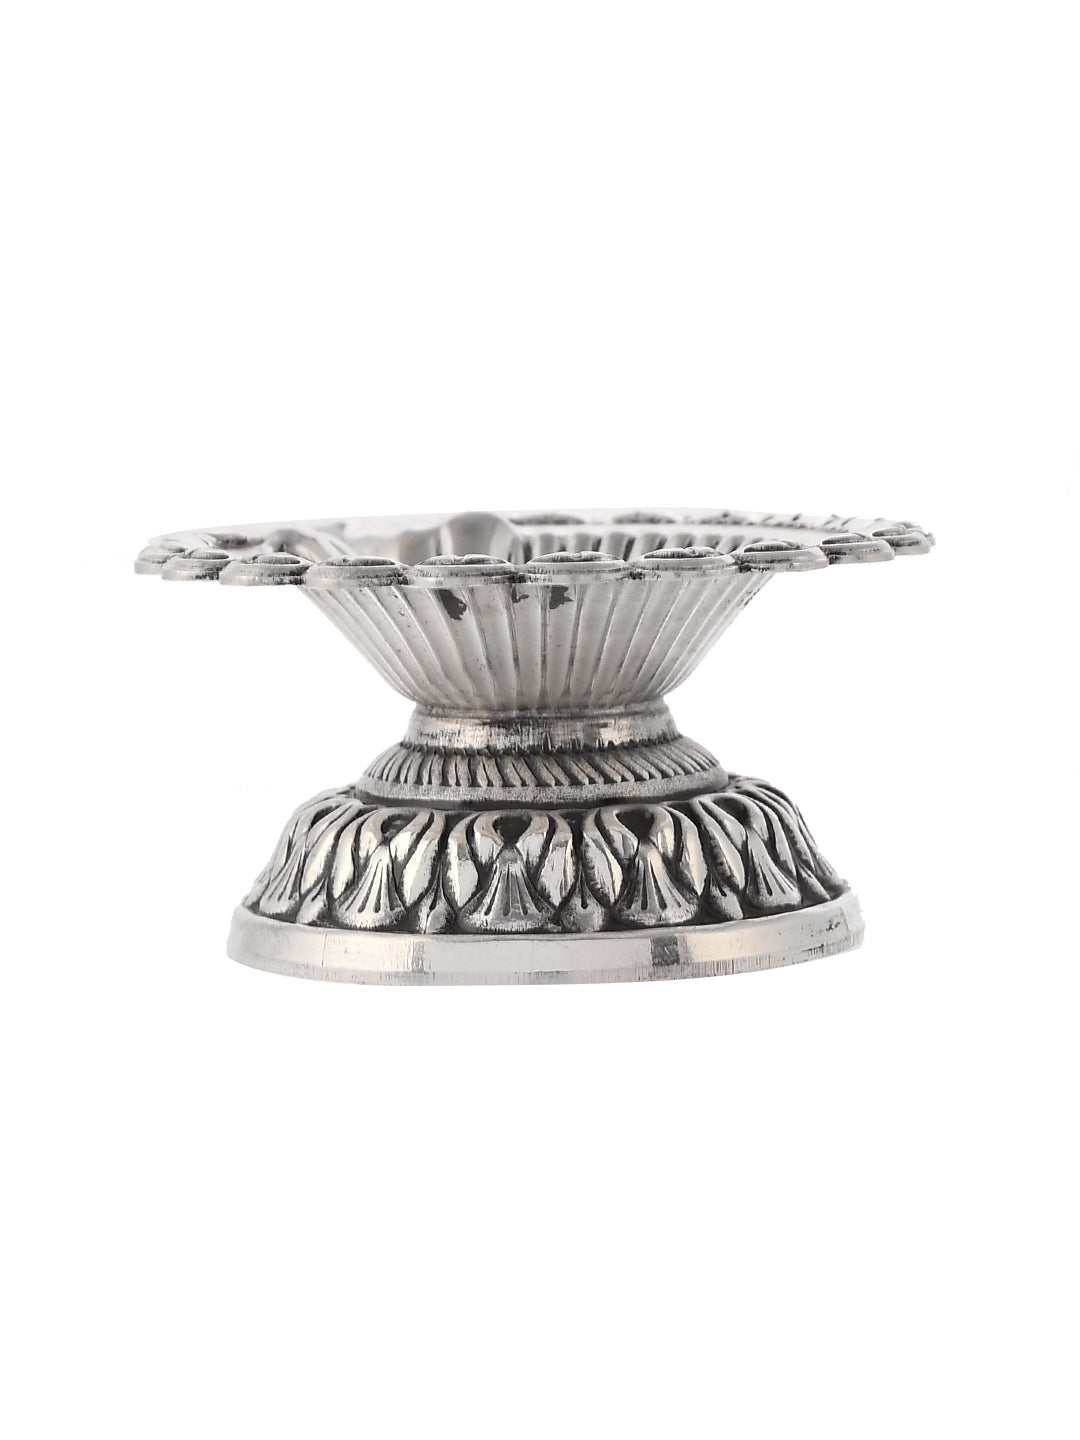 999 Sterling Silver Aarti Diya - Divine Illumination for Your Home